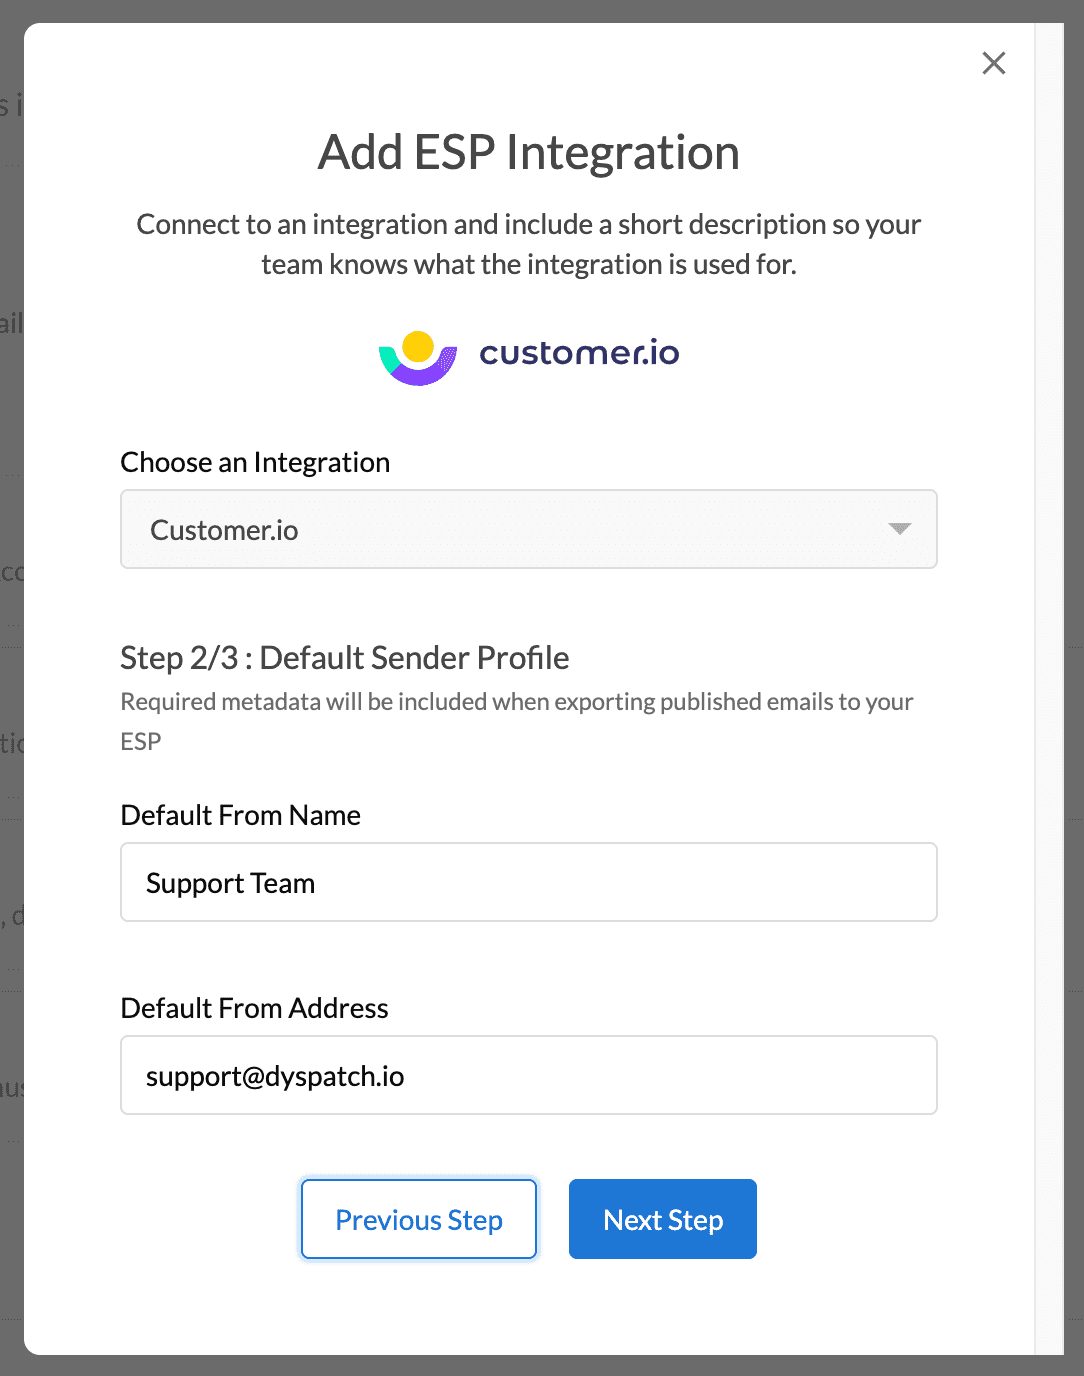 Dyspatch Add ESP Integration modal page 2 with default from name and default from address inputs